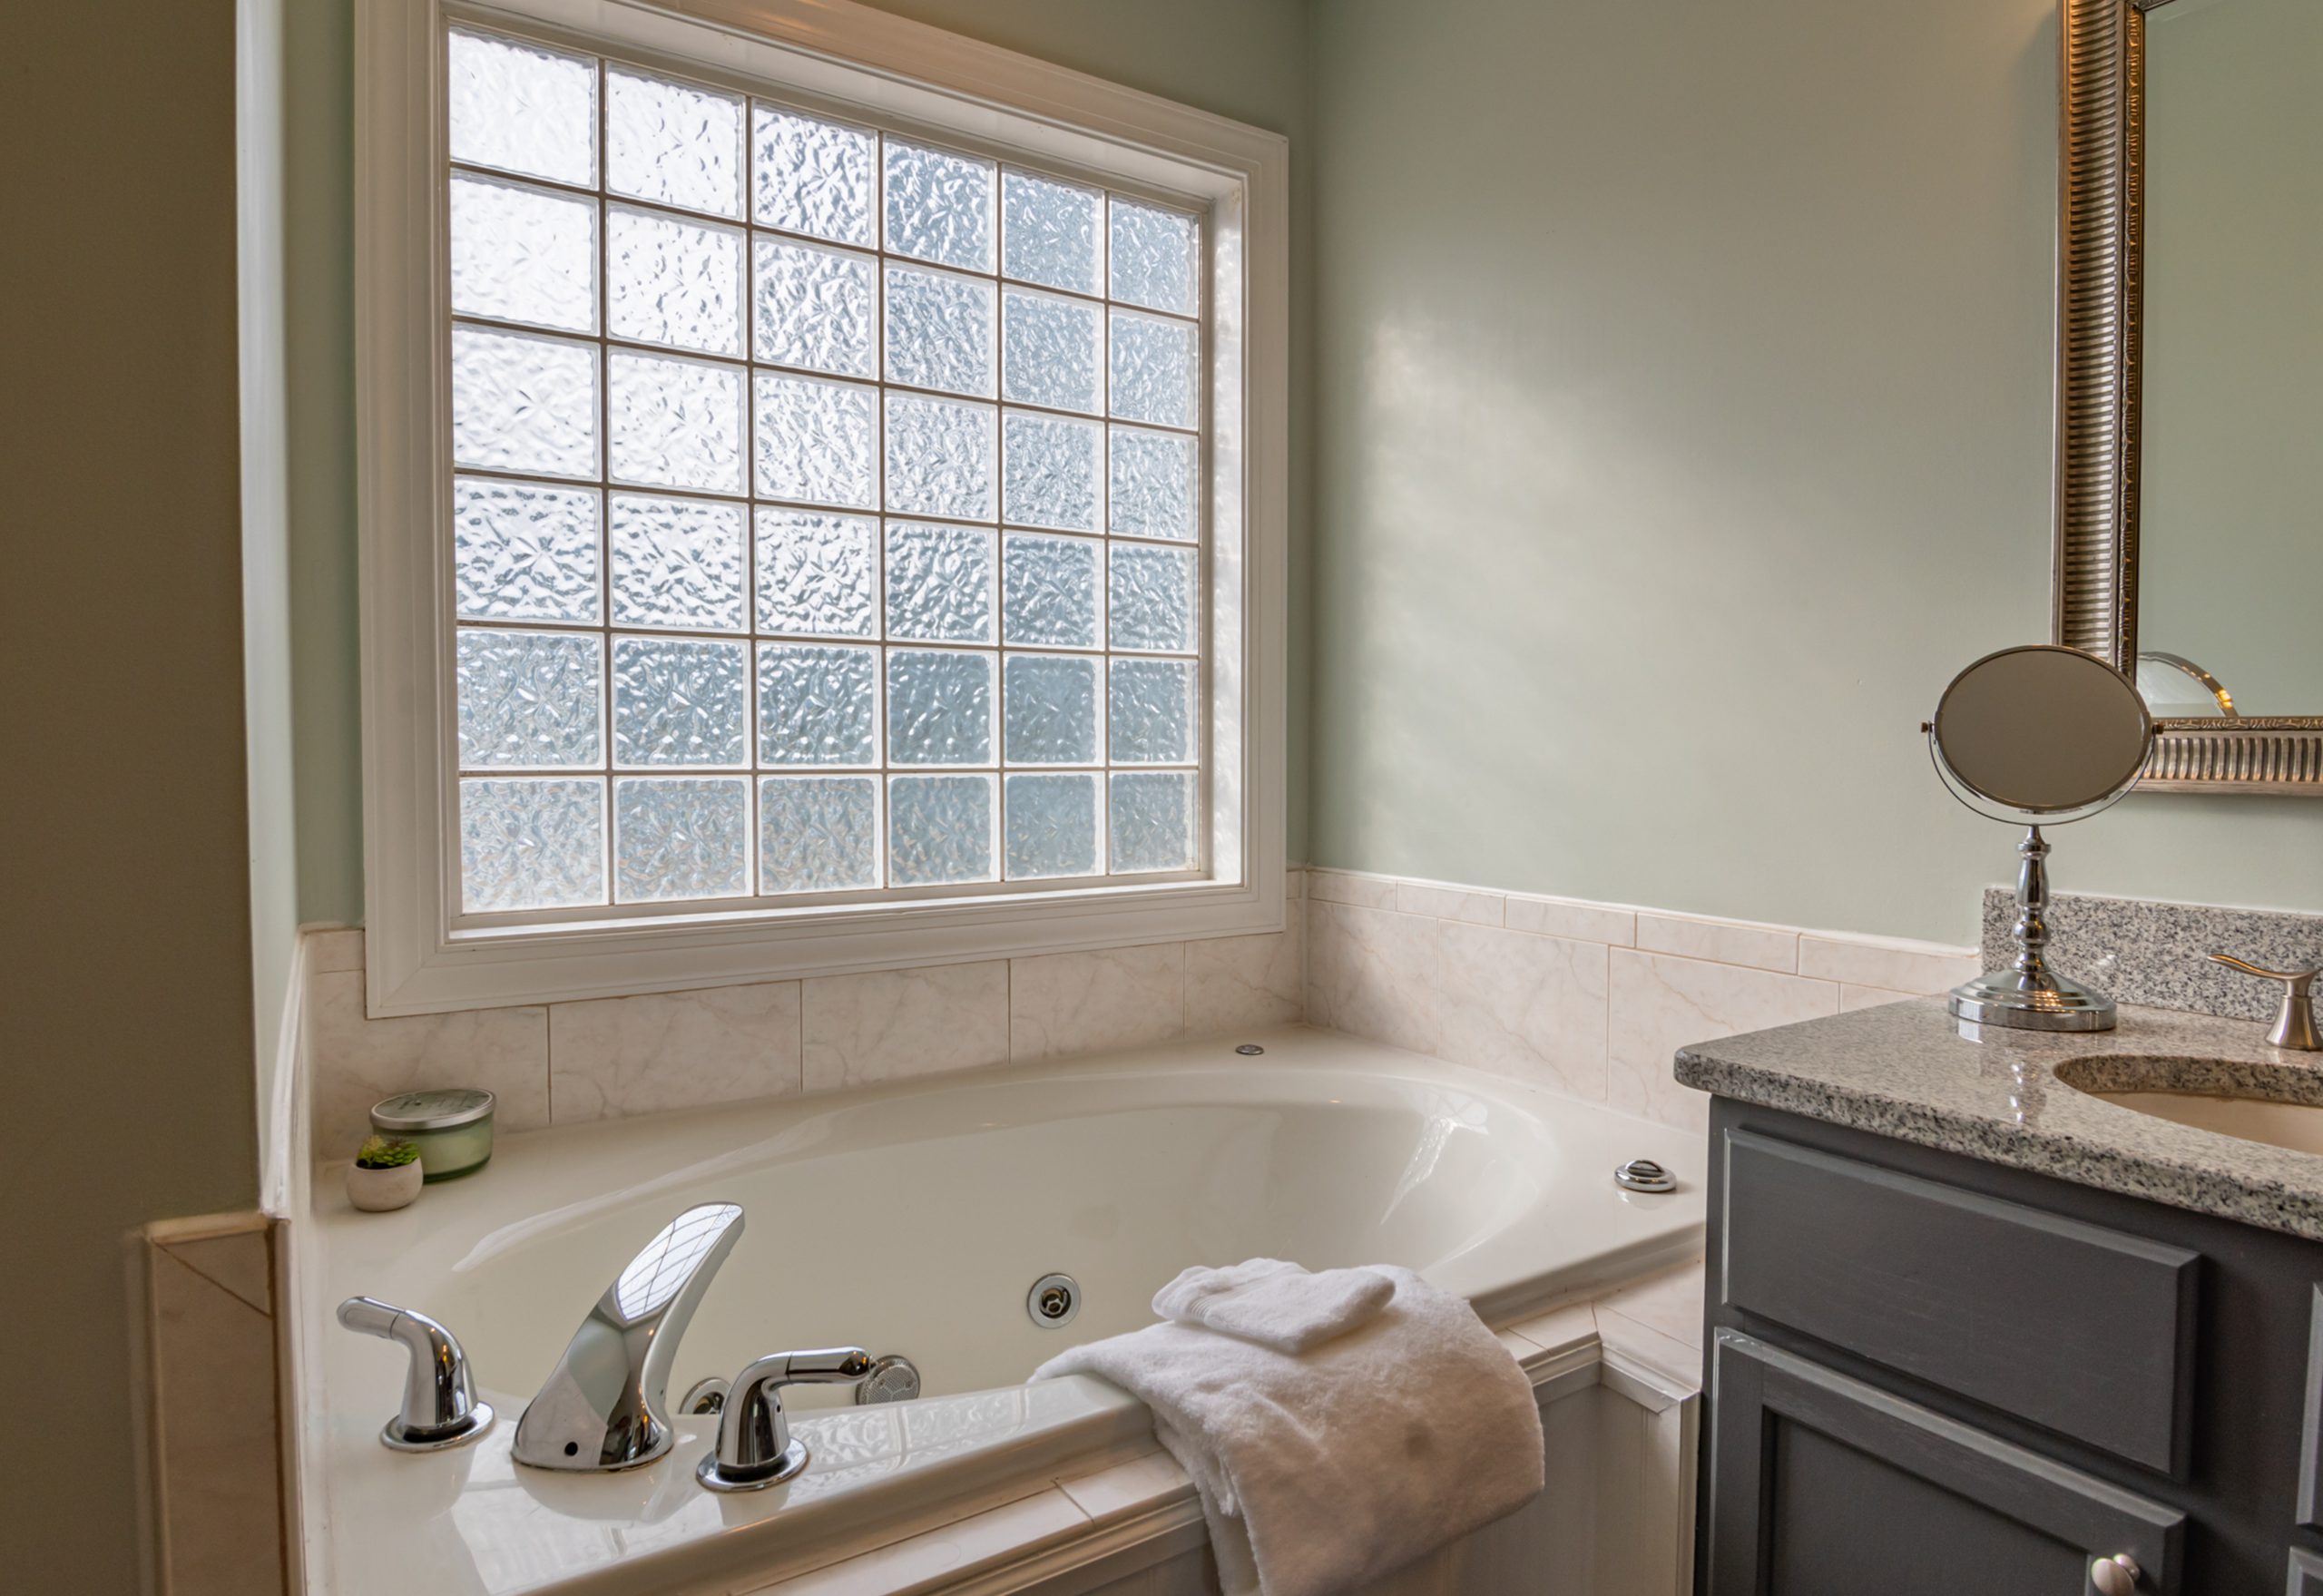 ARV in real estate can take a hit if you just have a tub in your bathroom. This picture shows a tub with towels draped over the sides. There's a window above the tub. To the right side you can see a sing with a small mirror on top.